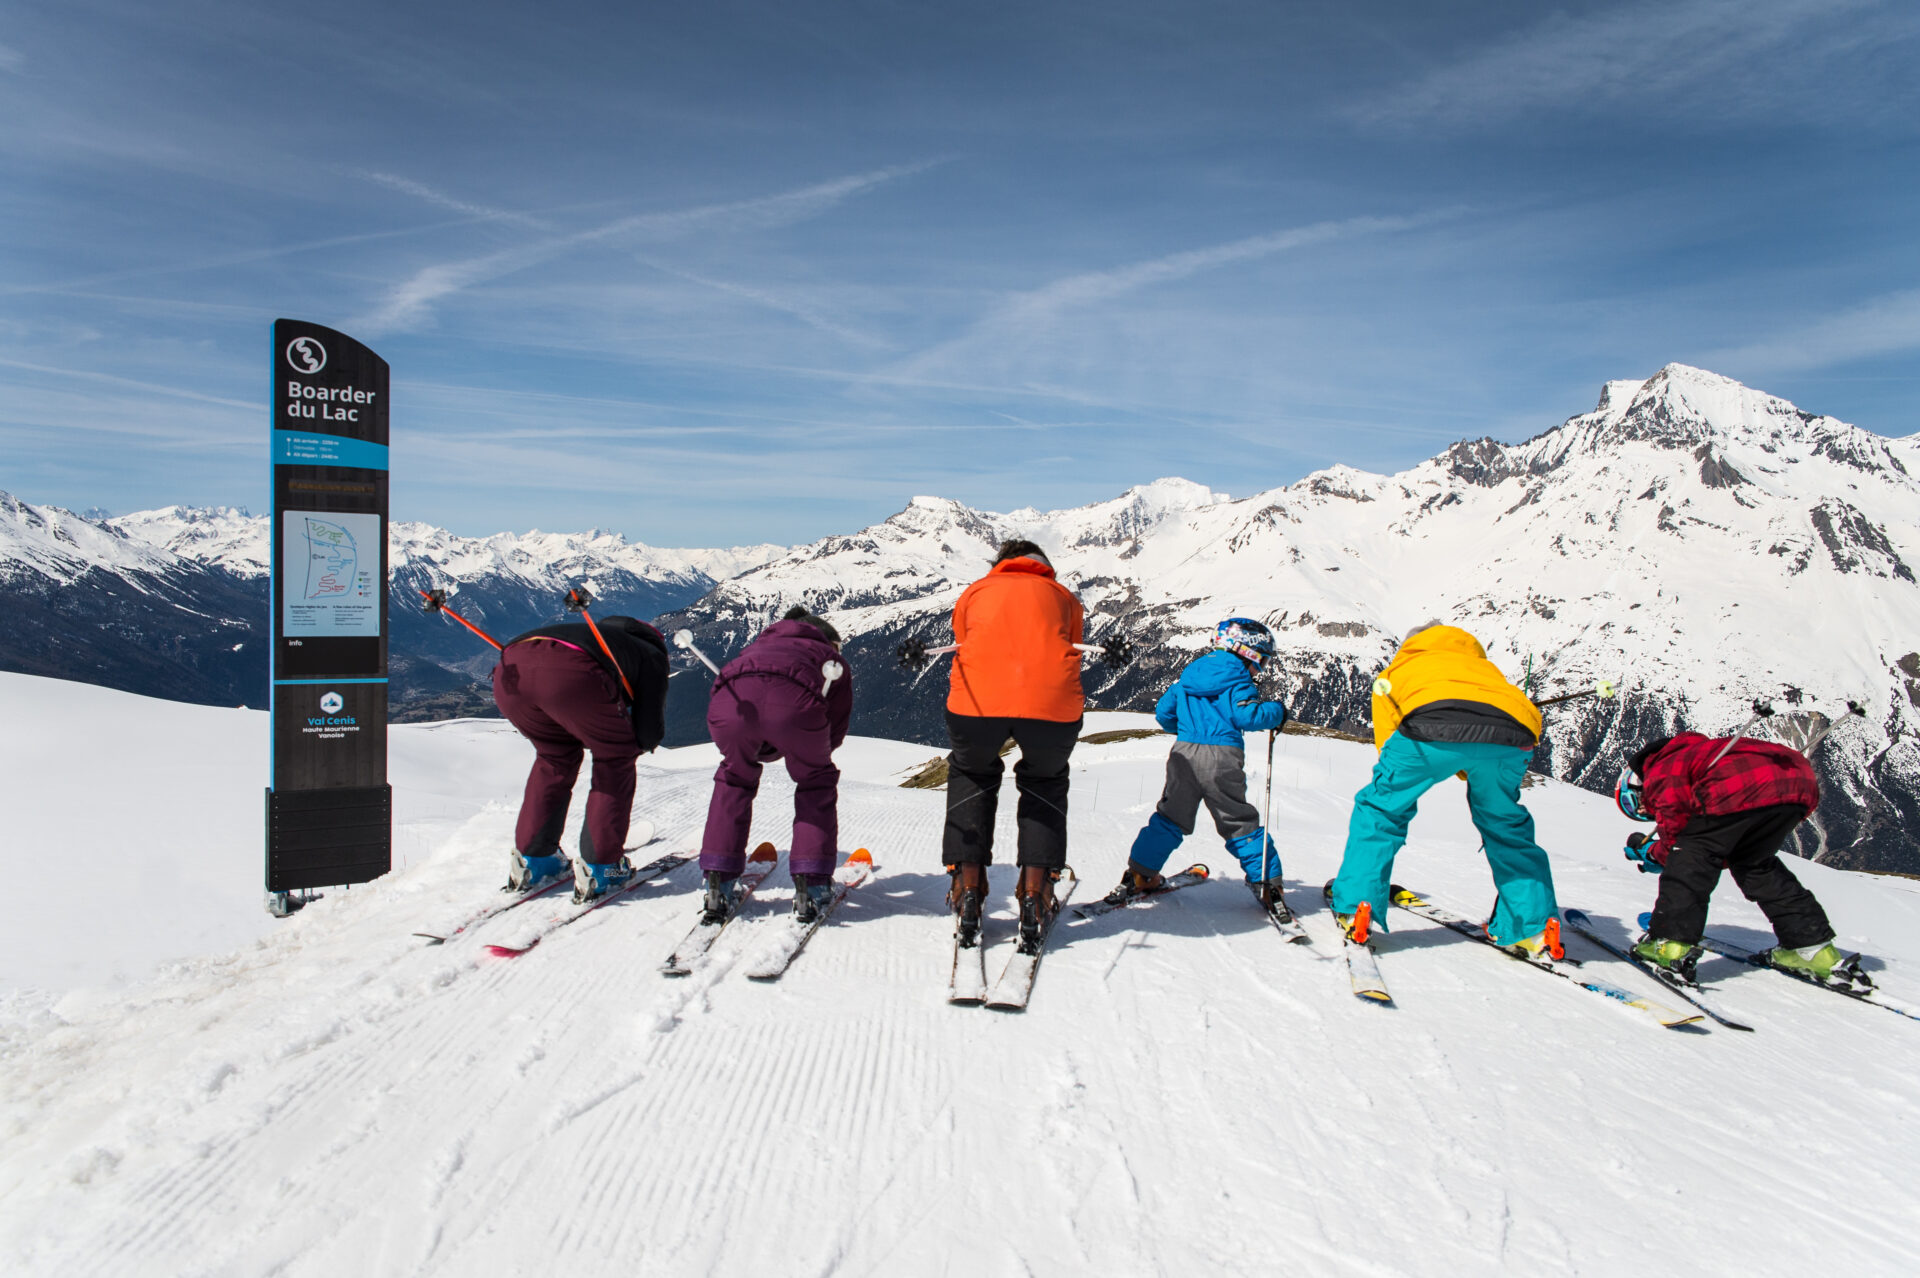 A group of skiers going down the pistes